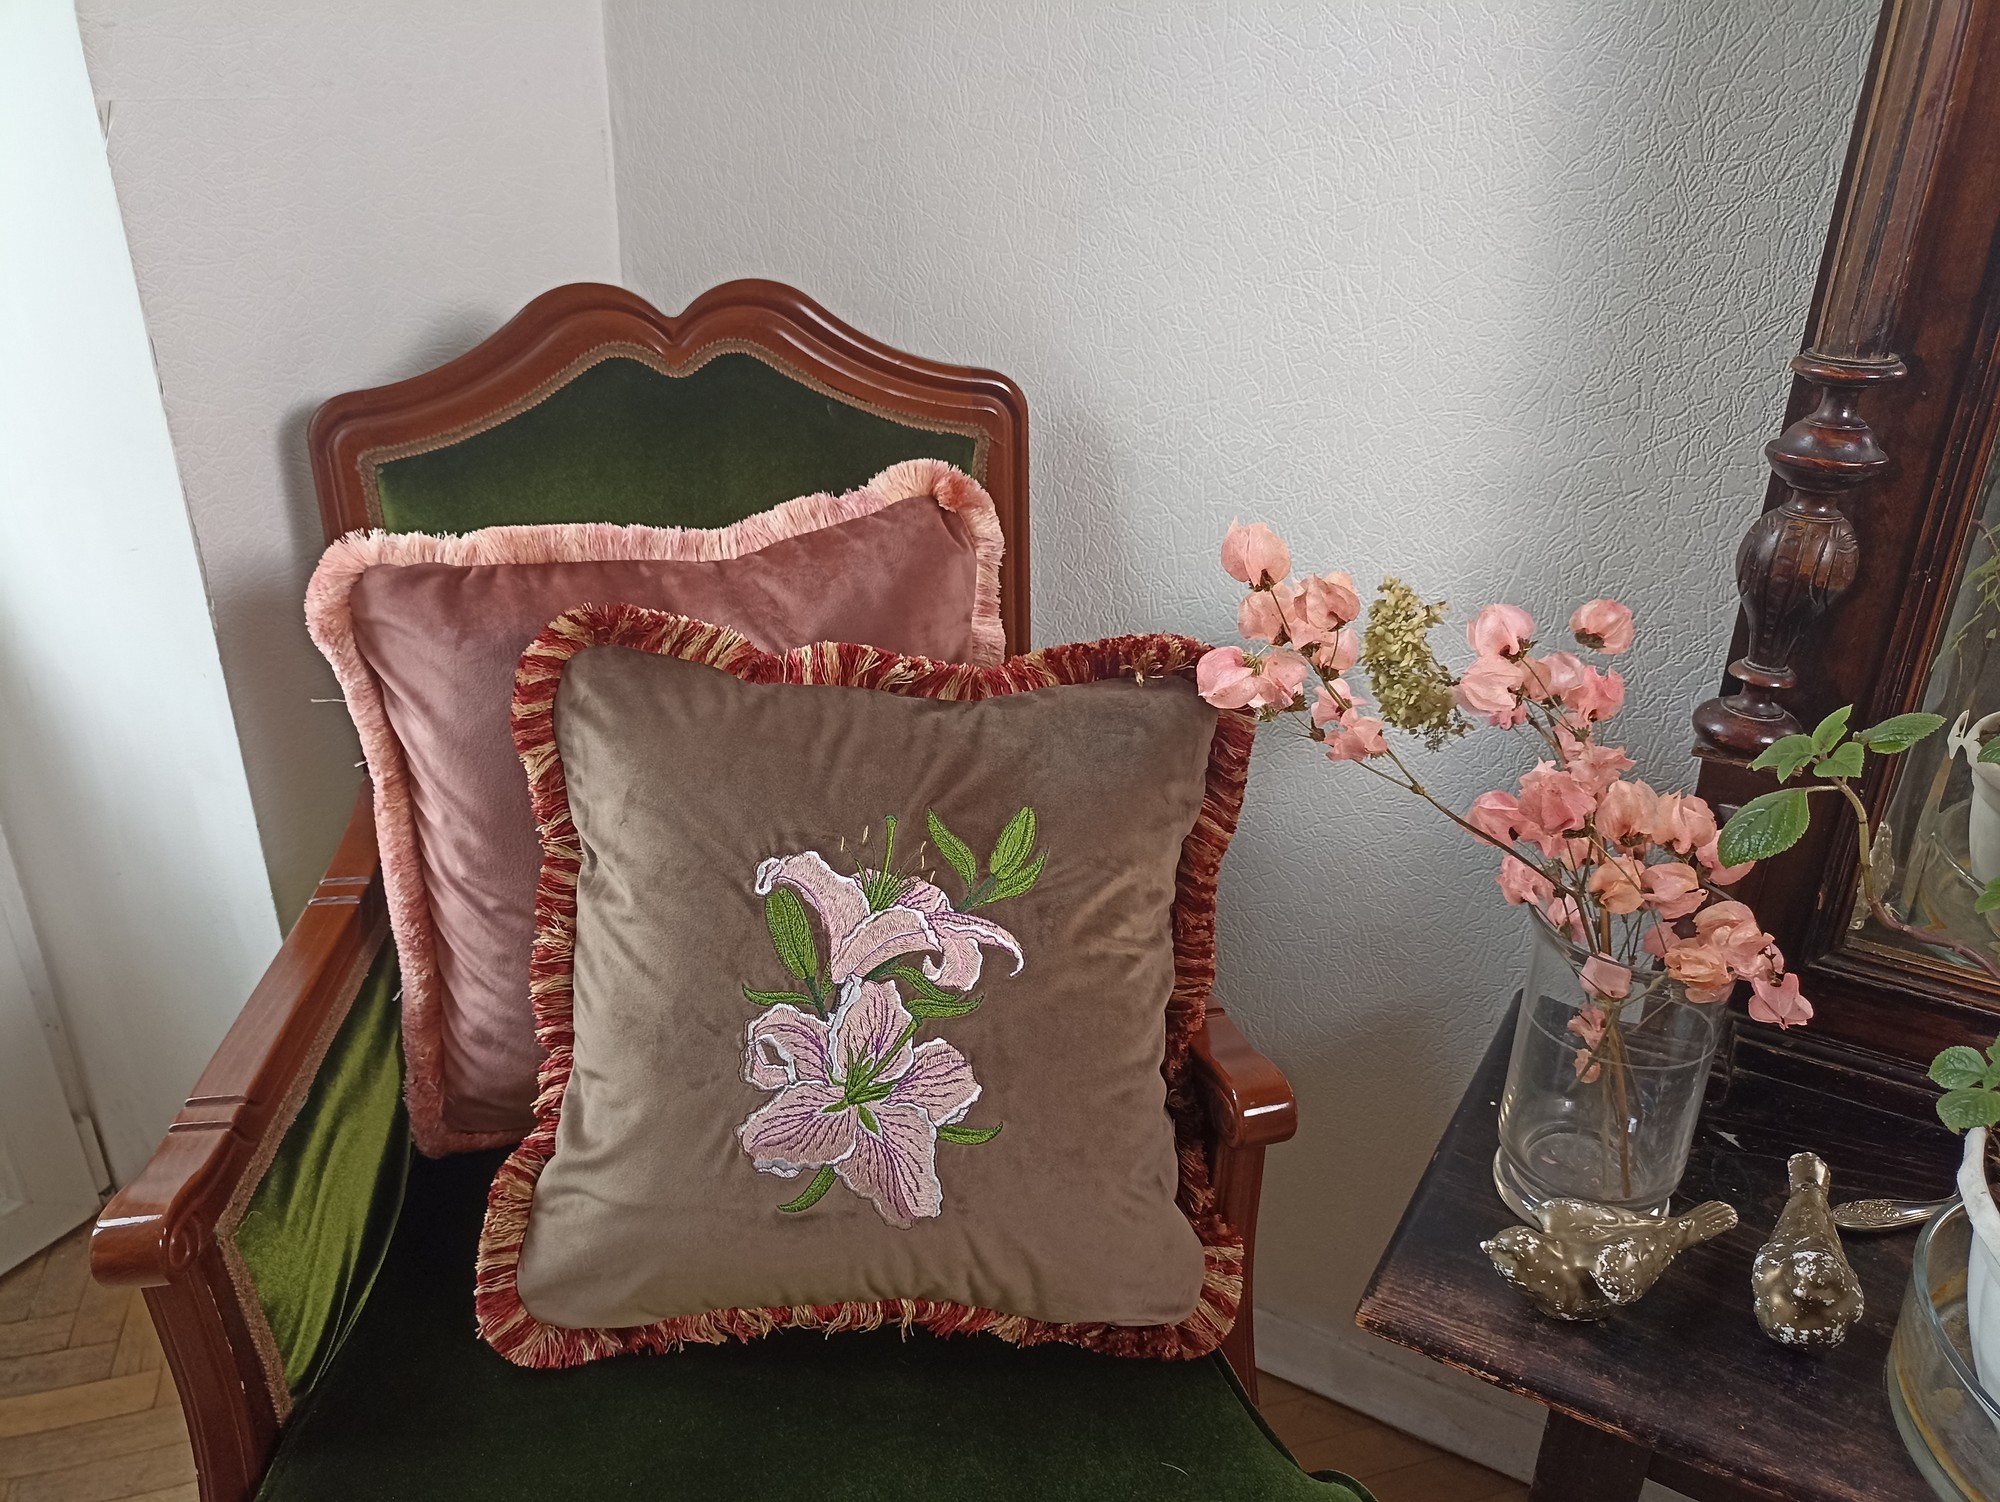 MR Pillow velvet with lilies embroidery